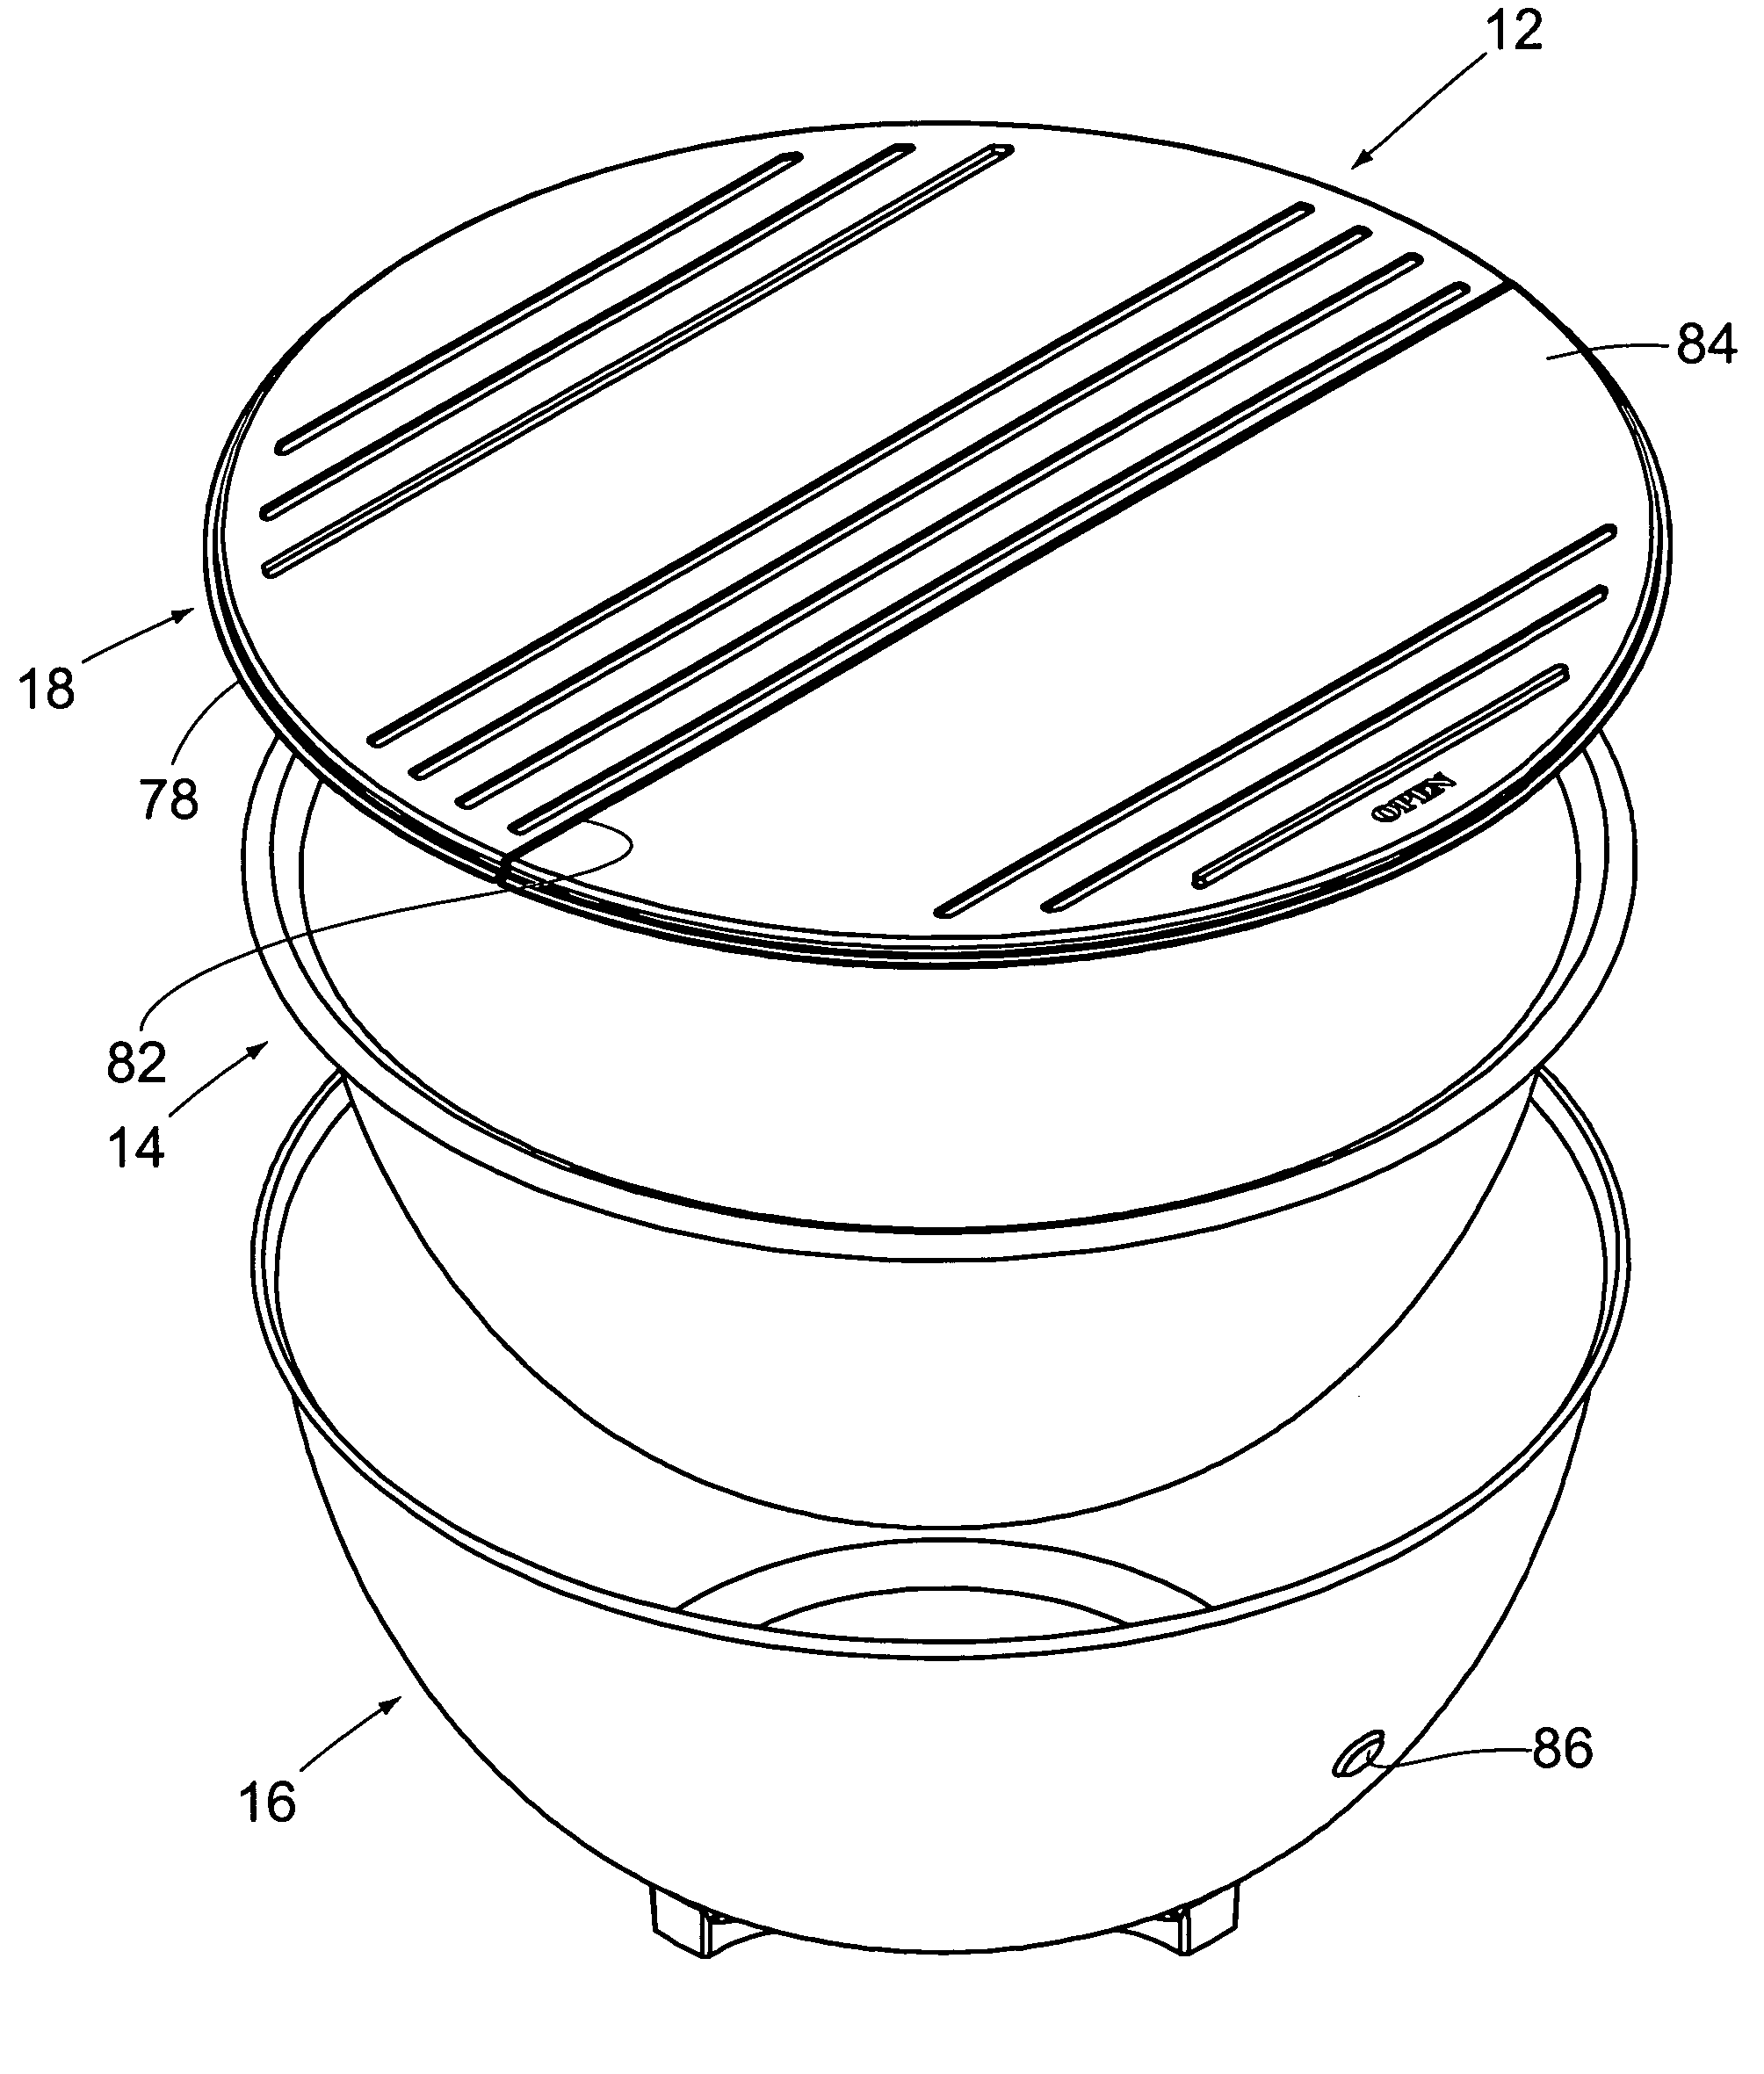 Food and beverage storage and serving vessel comprising an integral phase change material